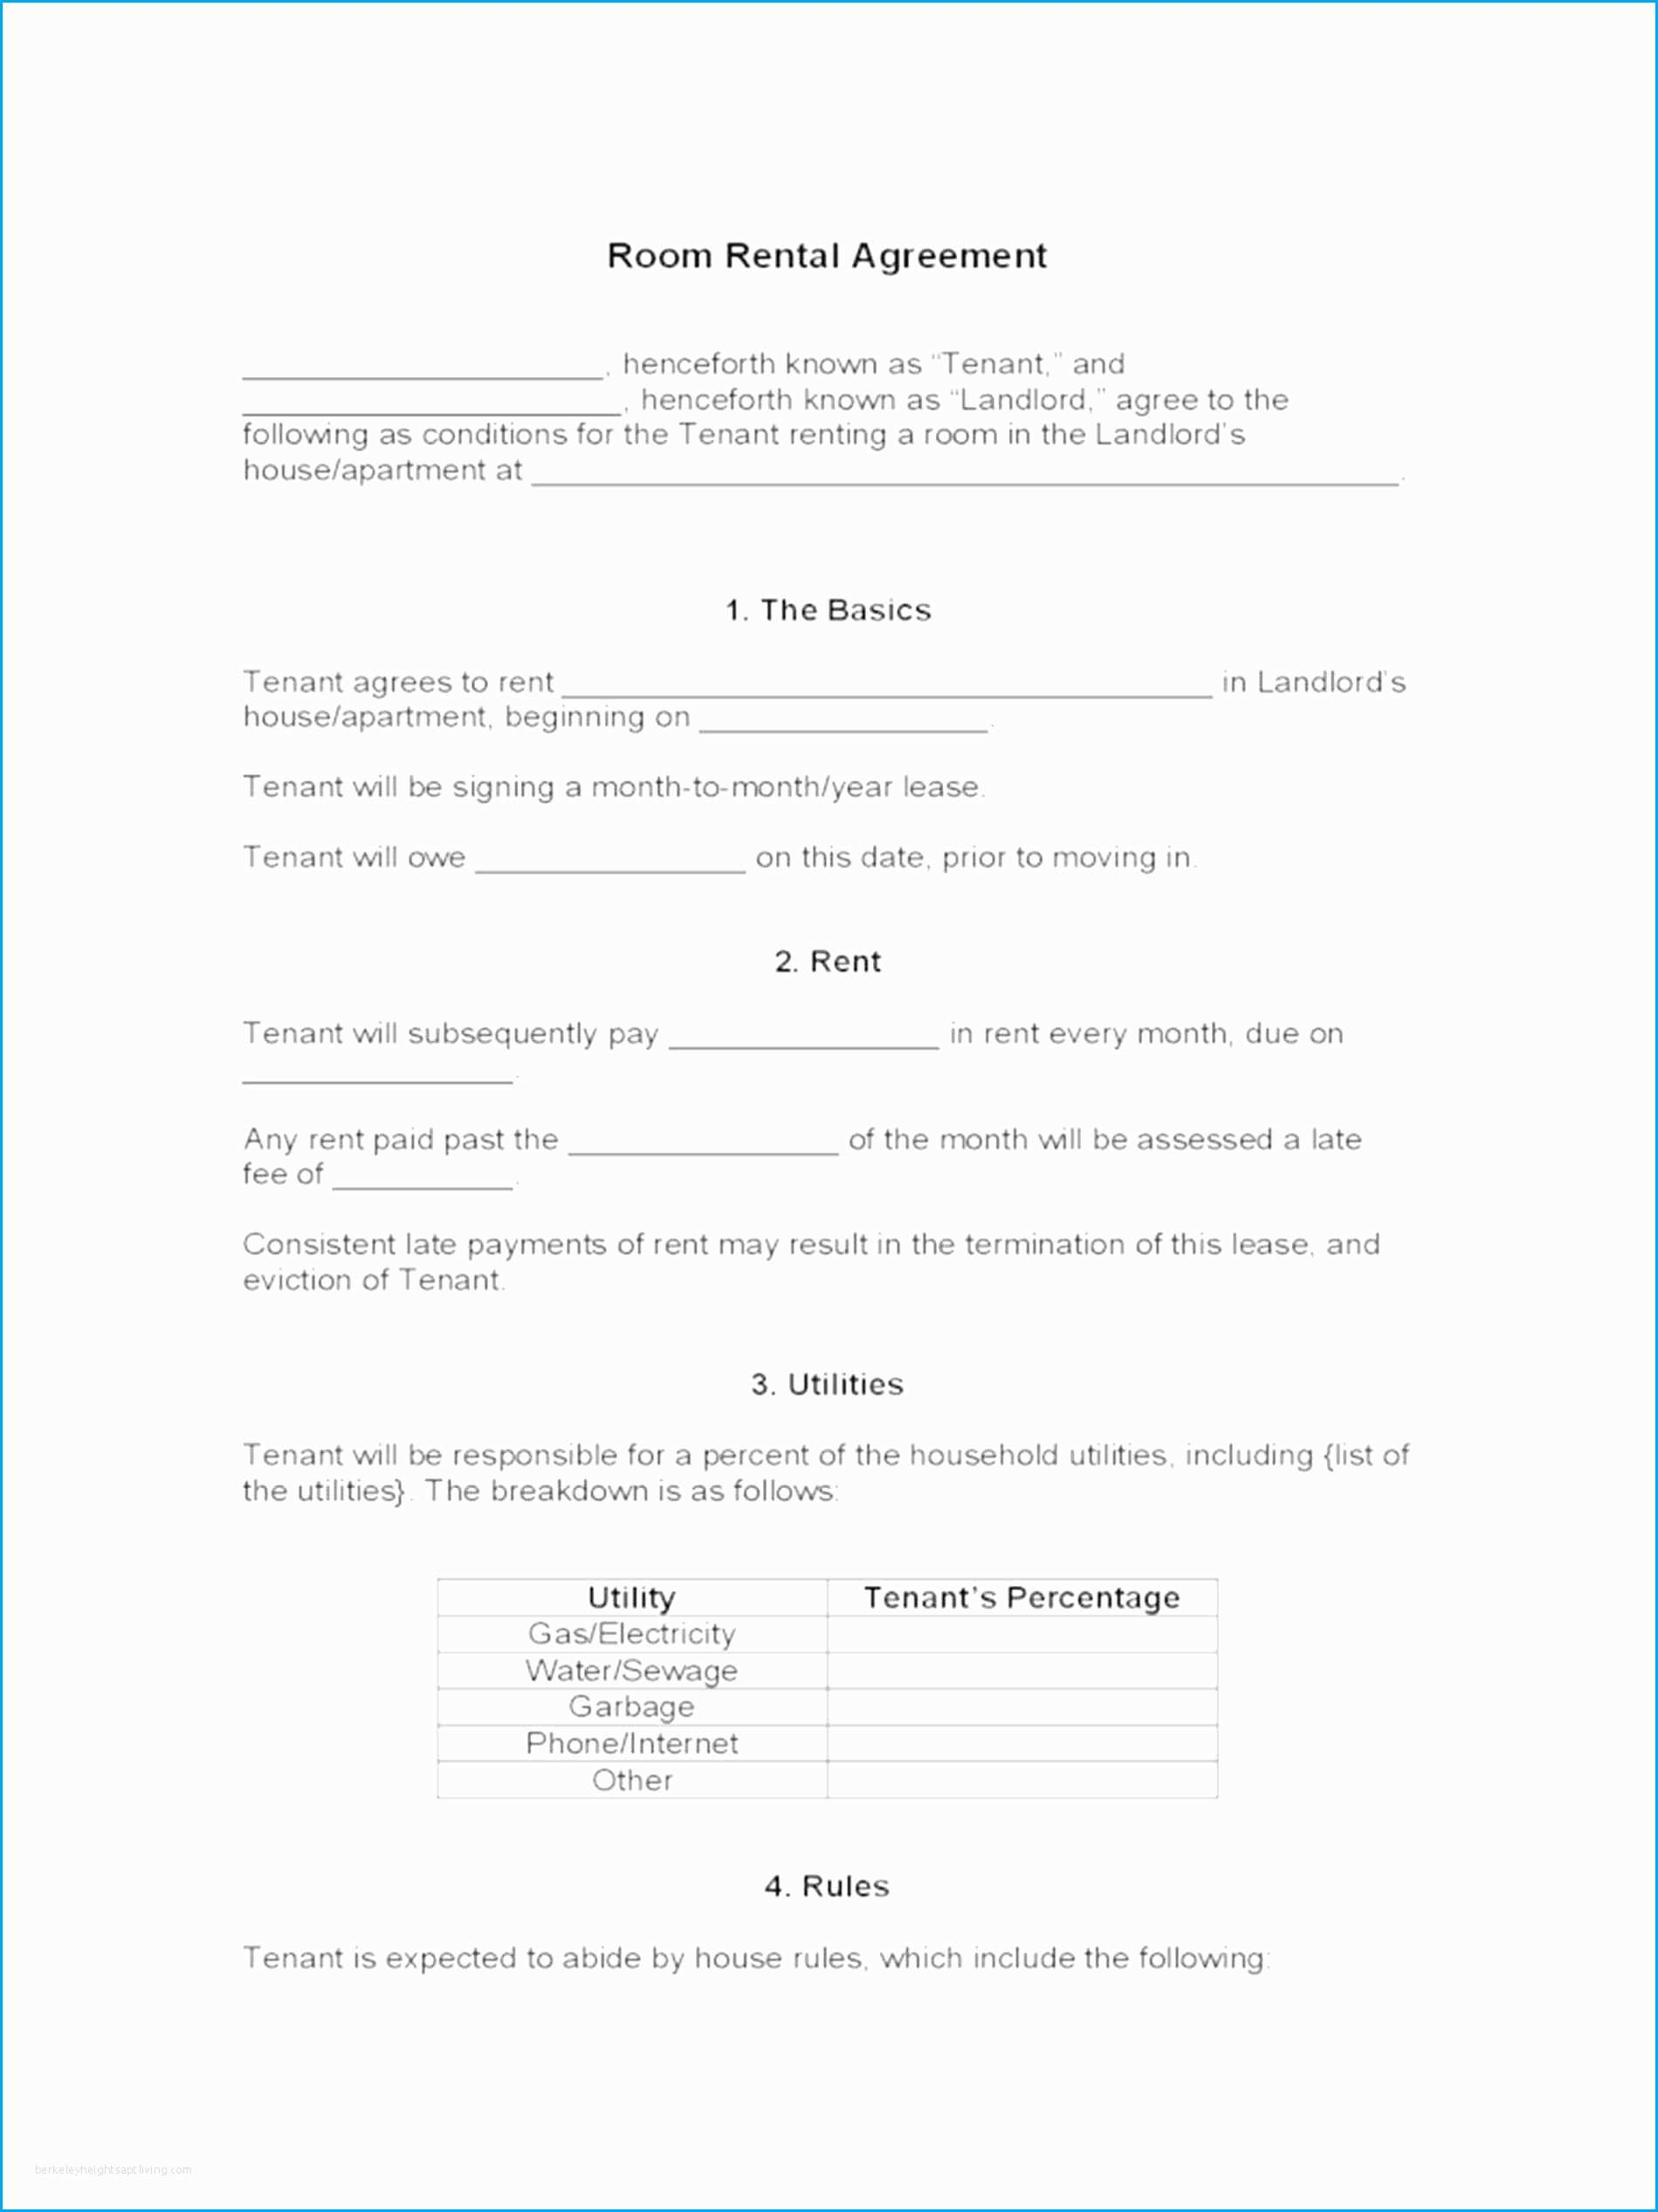 lease-abstract-spreadsheet-with-regard-to-54-good-of-lease-abstract